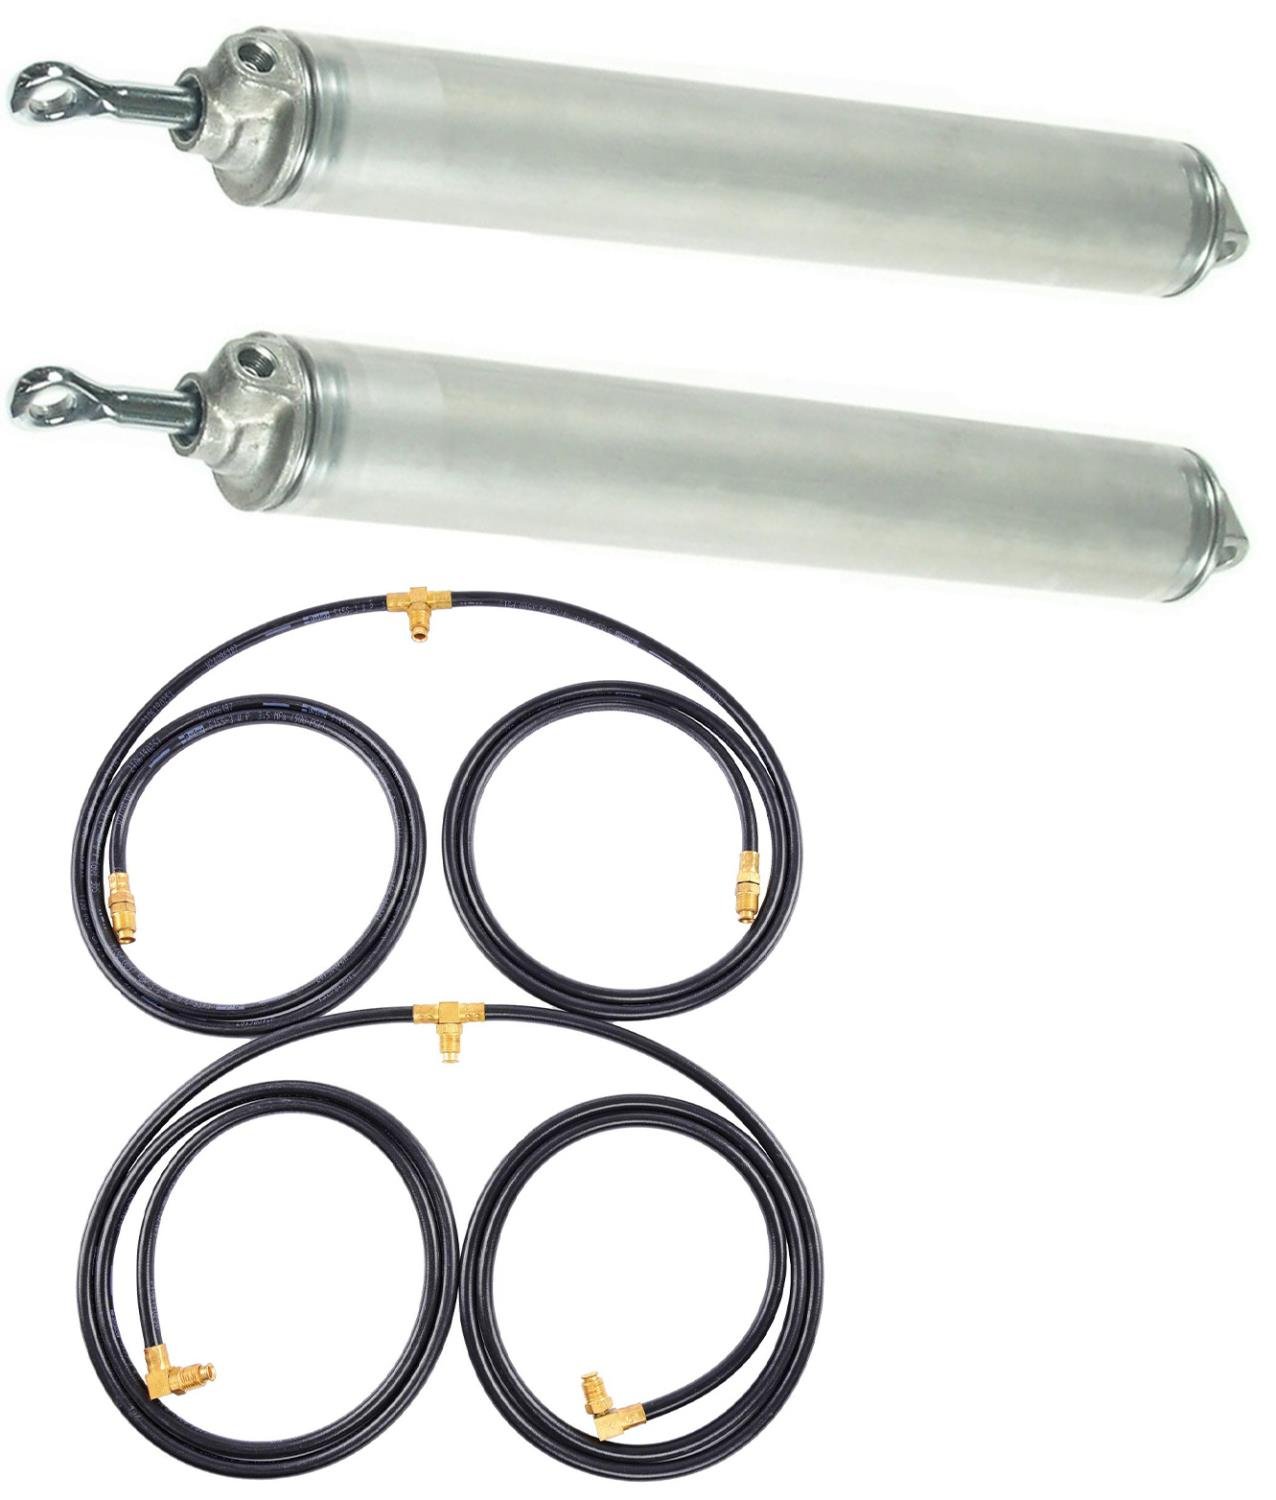 Convertible Top Cylinder & Hose Kit for 1959-1960